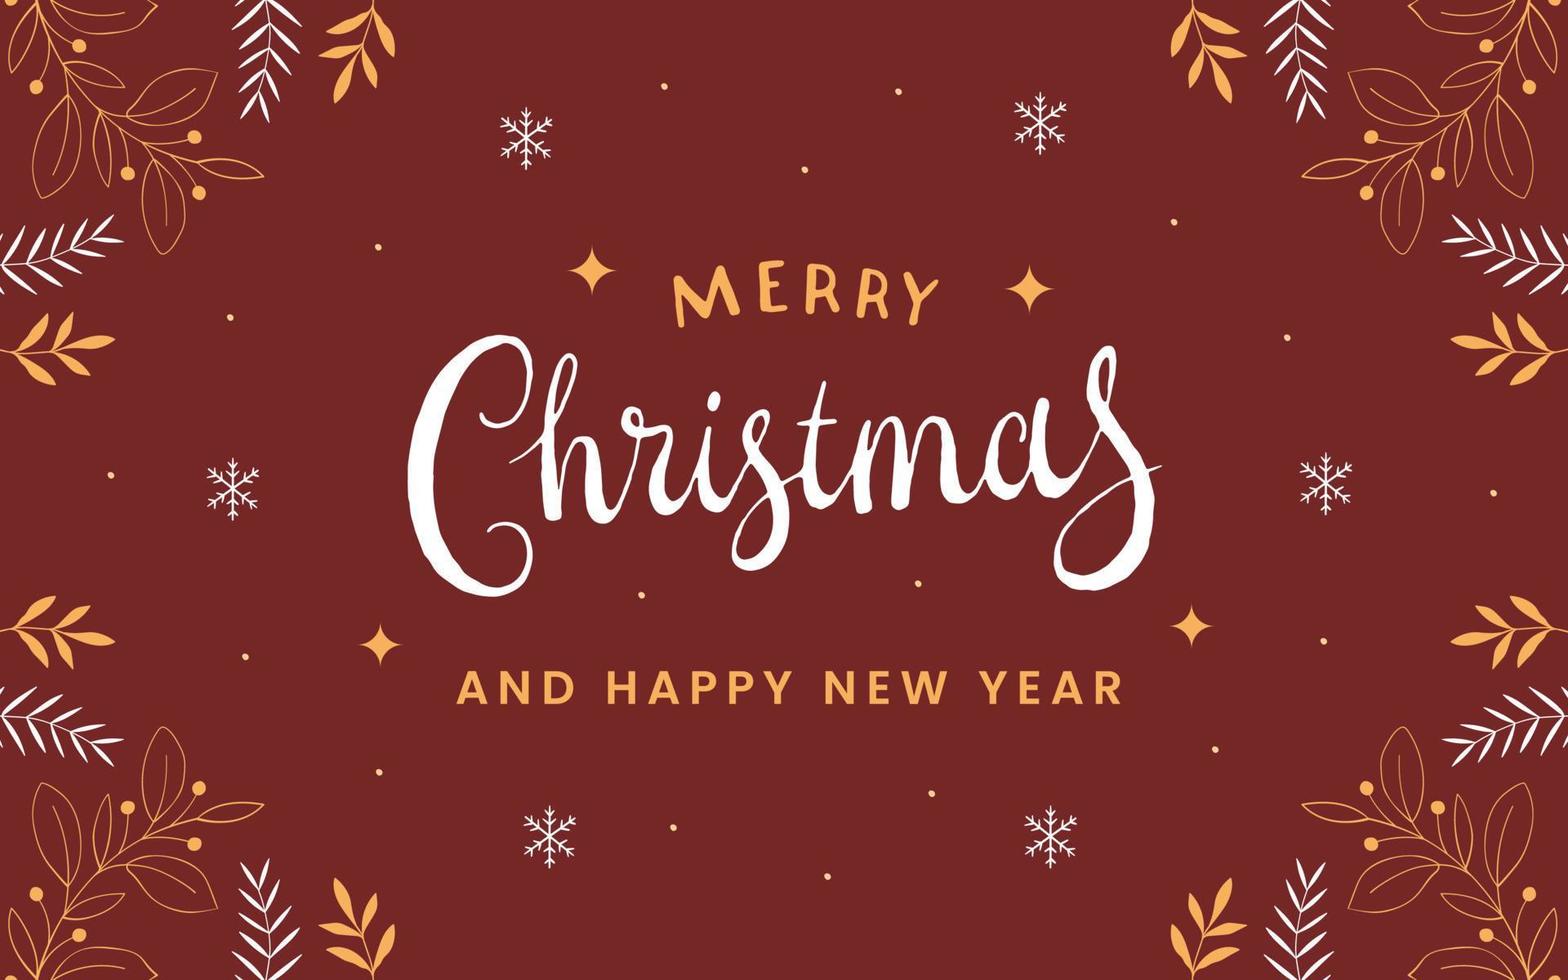 Merry christmas lettering text background. greeting card vector illustration